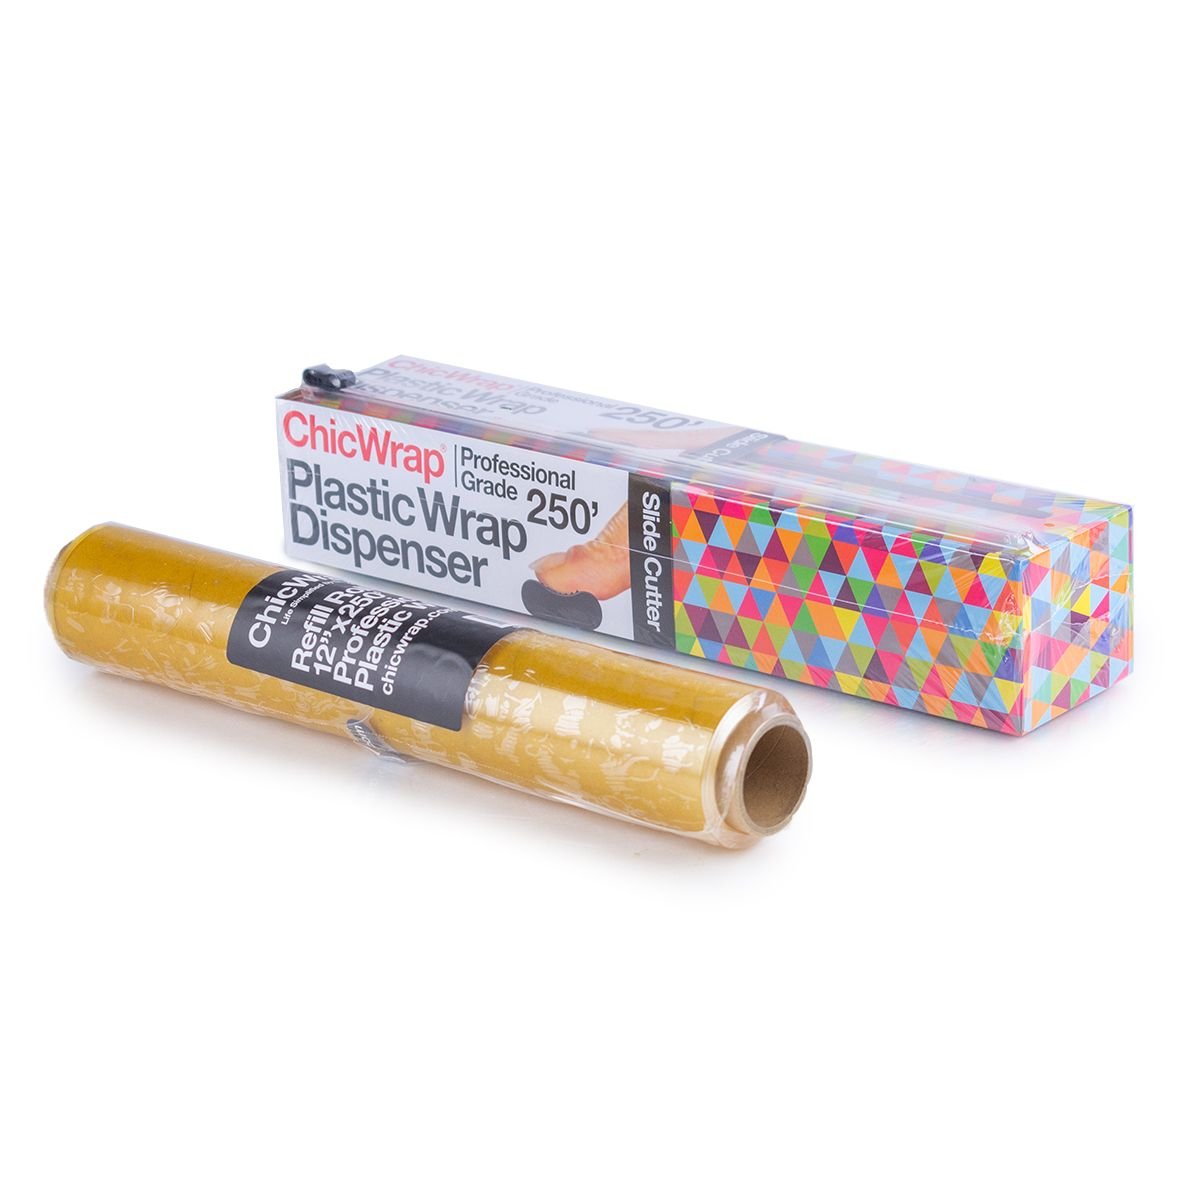 Chicwrap Lemon Plastic Wrap Dispenser With 12 X 250' Roll Of